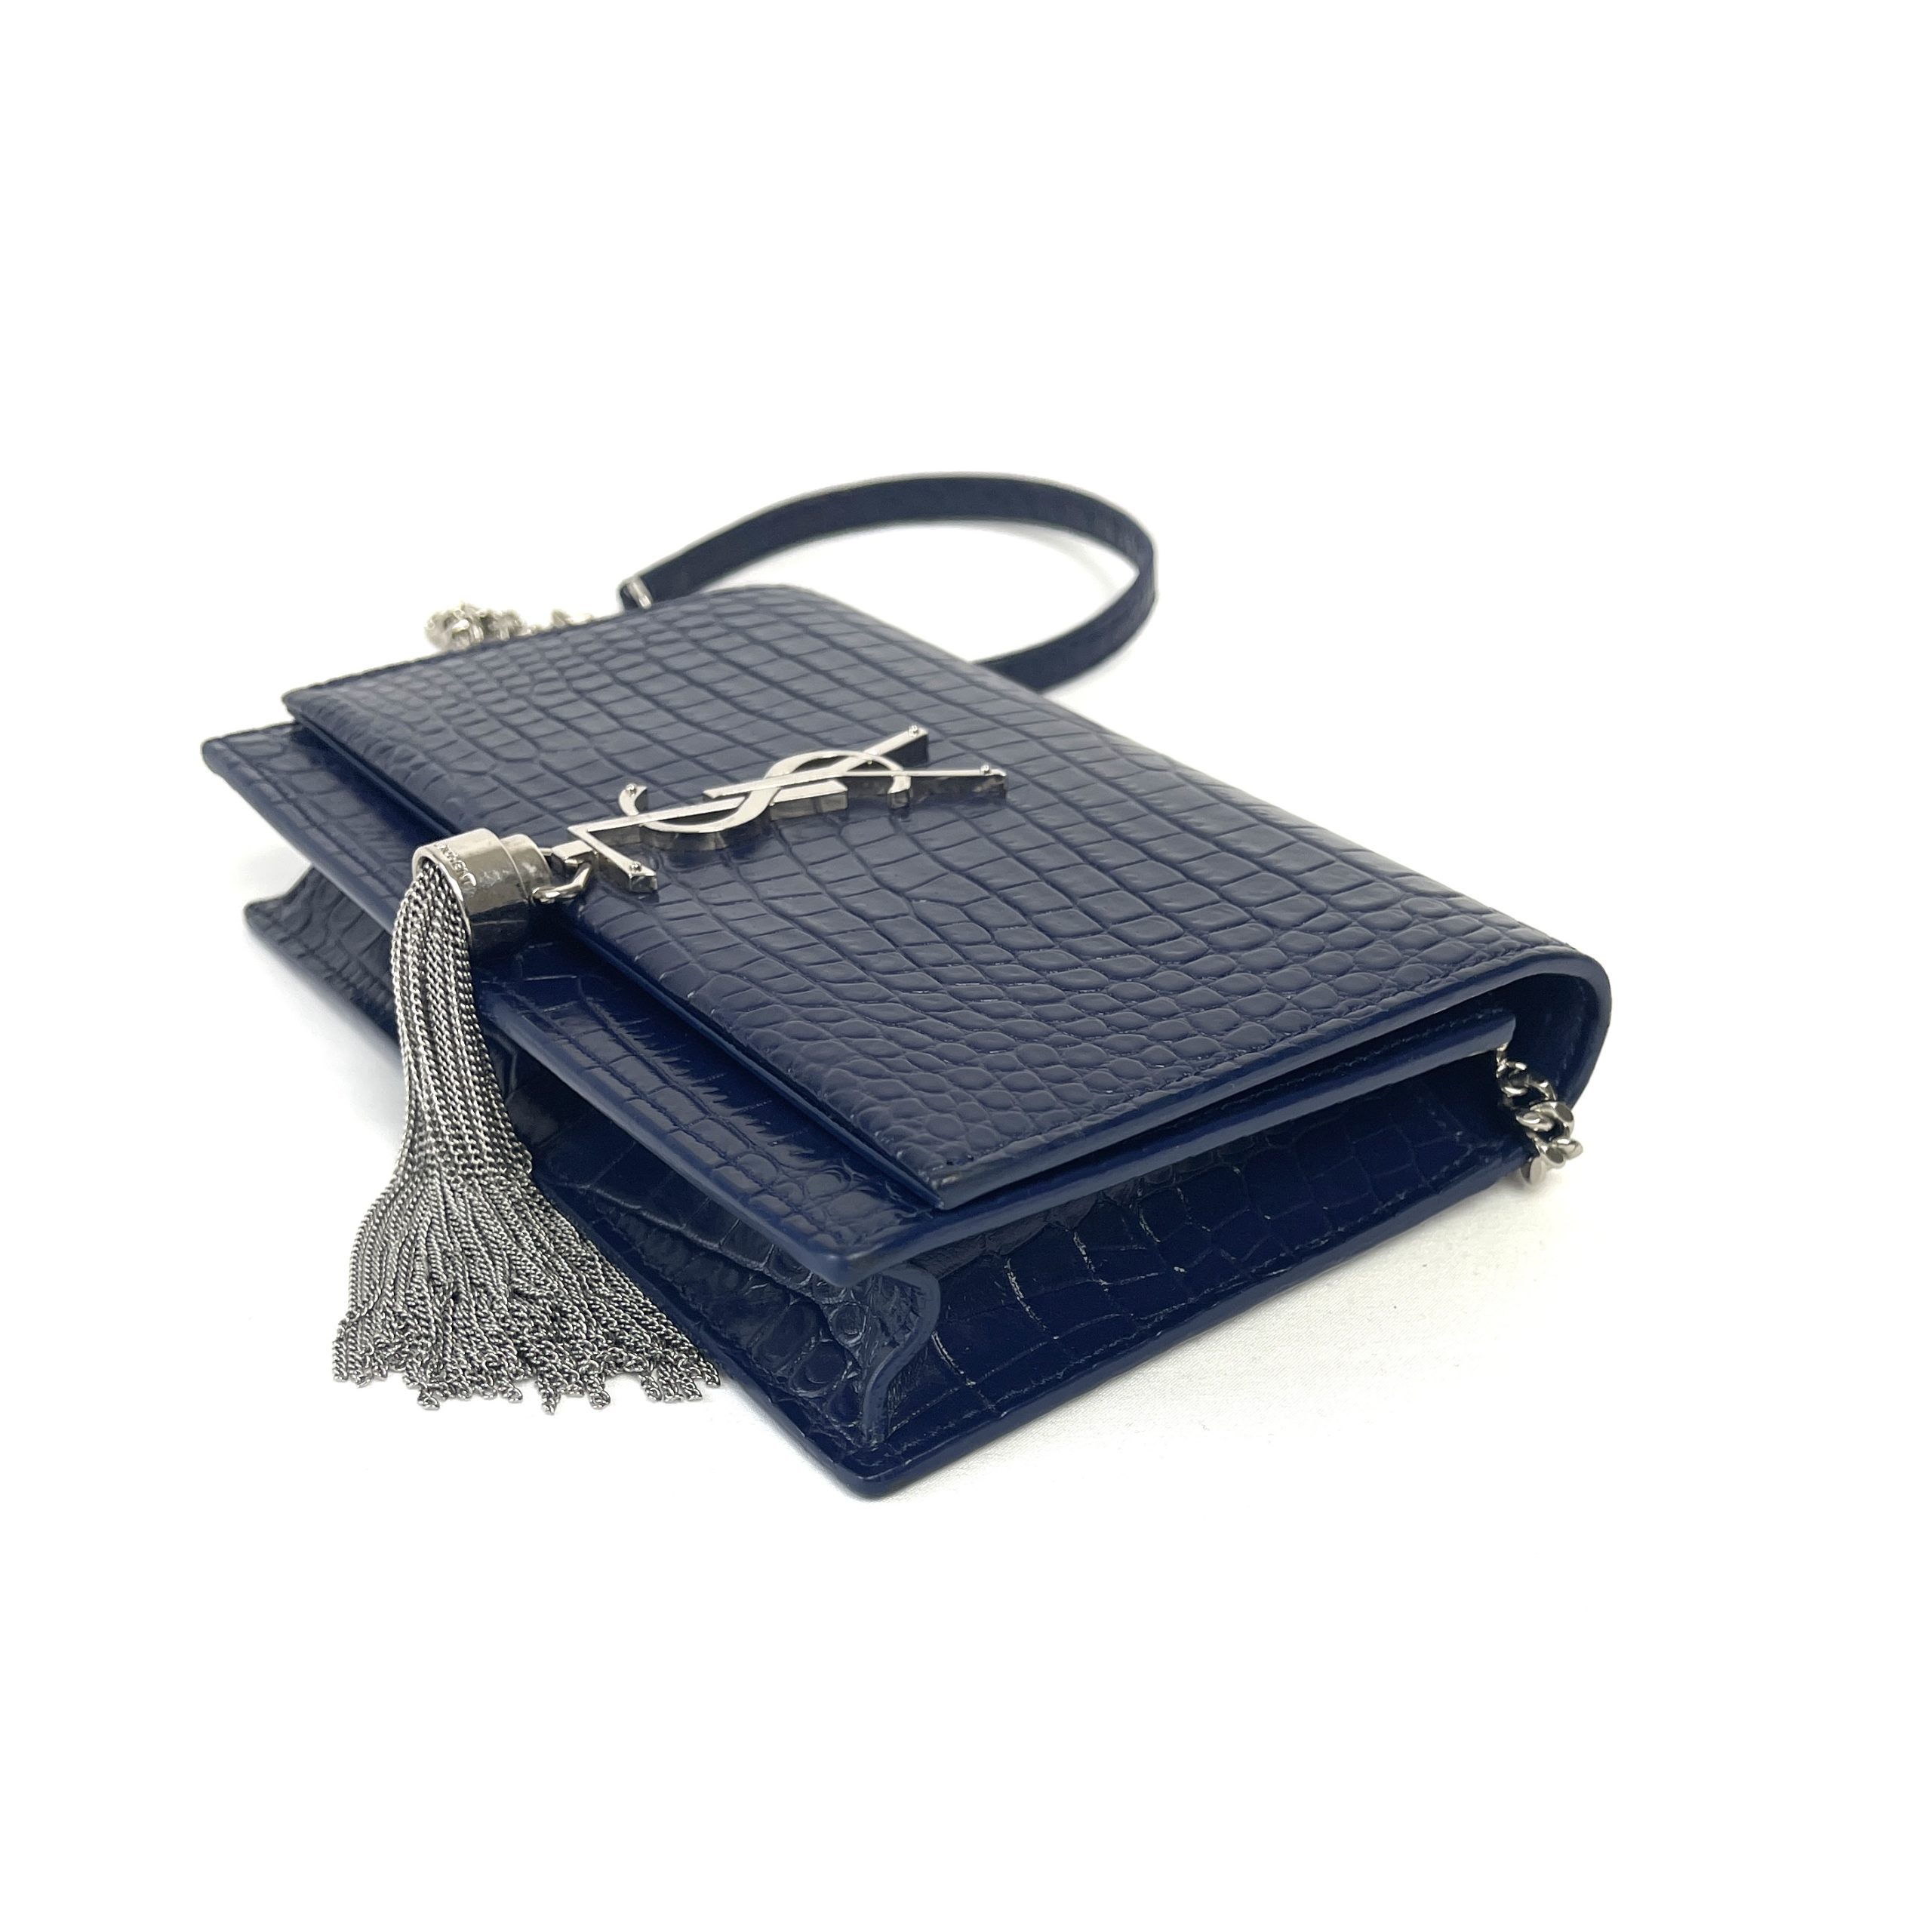 YSL KATE SMALL W/ TASSLE IN EMBOSSED CROC LEATHER